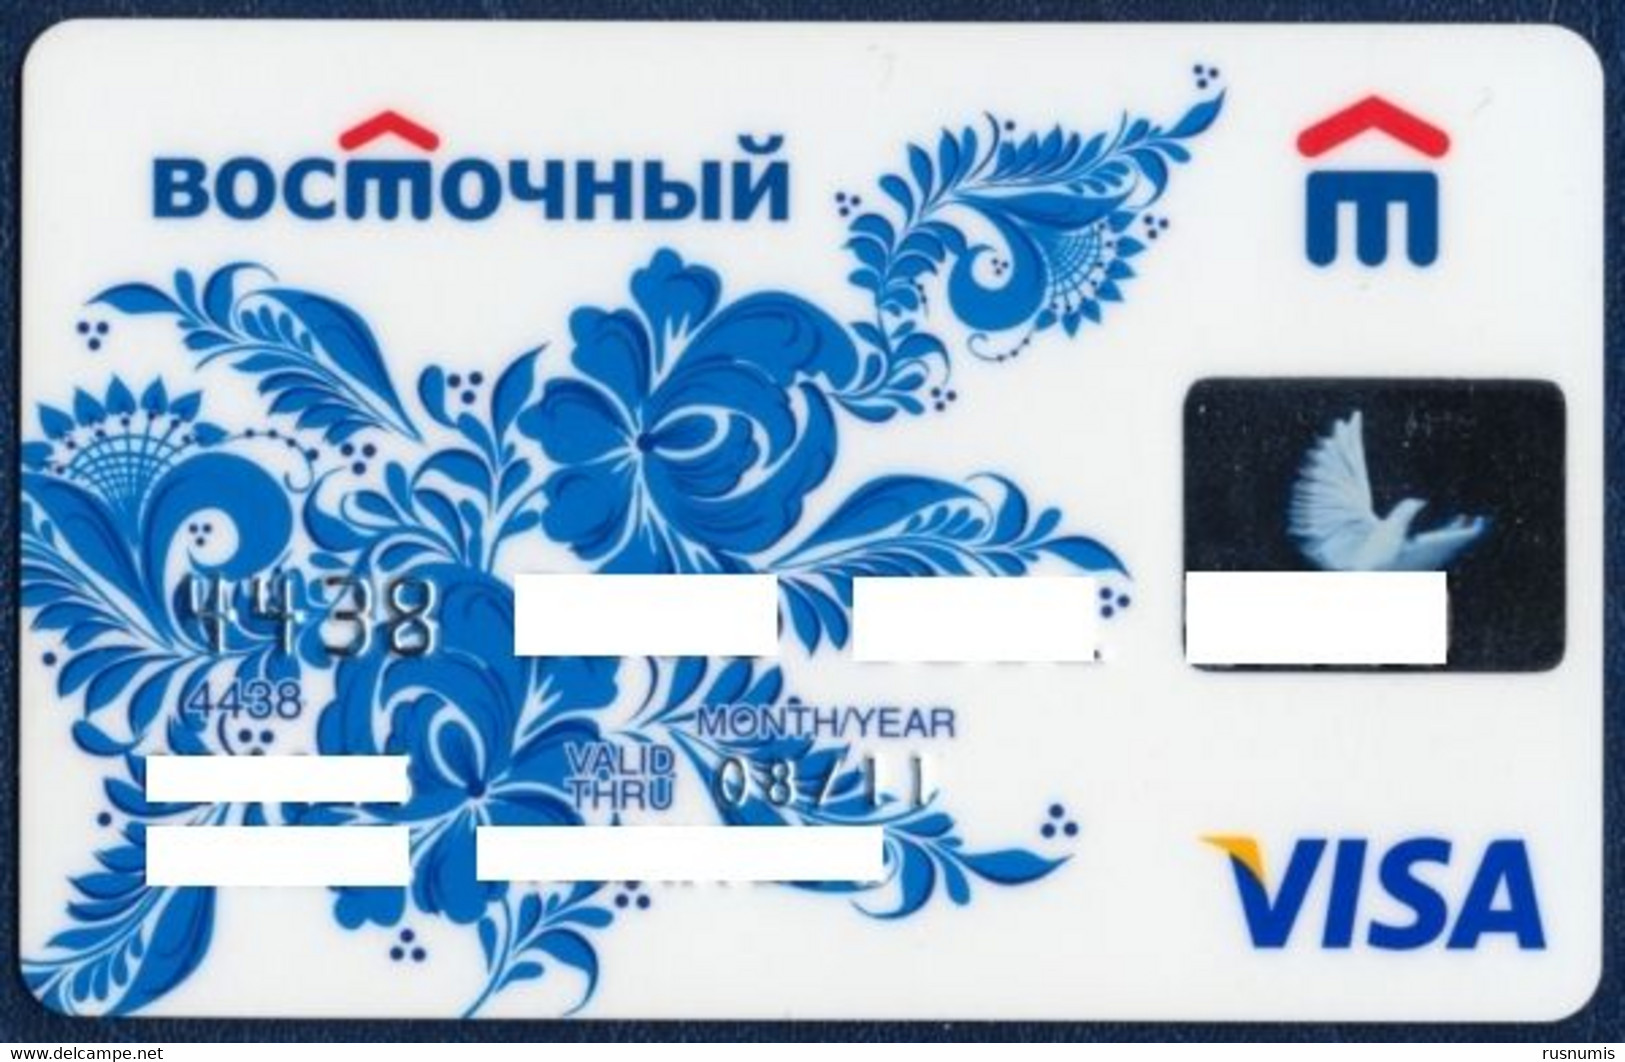 RUSSIA - RUSSIE - RUSSLAND VOSTOCHNY (EAST) BANK KHABAROVSK TOWN VISA CARD EXP. 2011 - Credit Cards (Exp. Date Min. 10 Years)